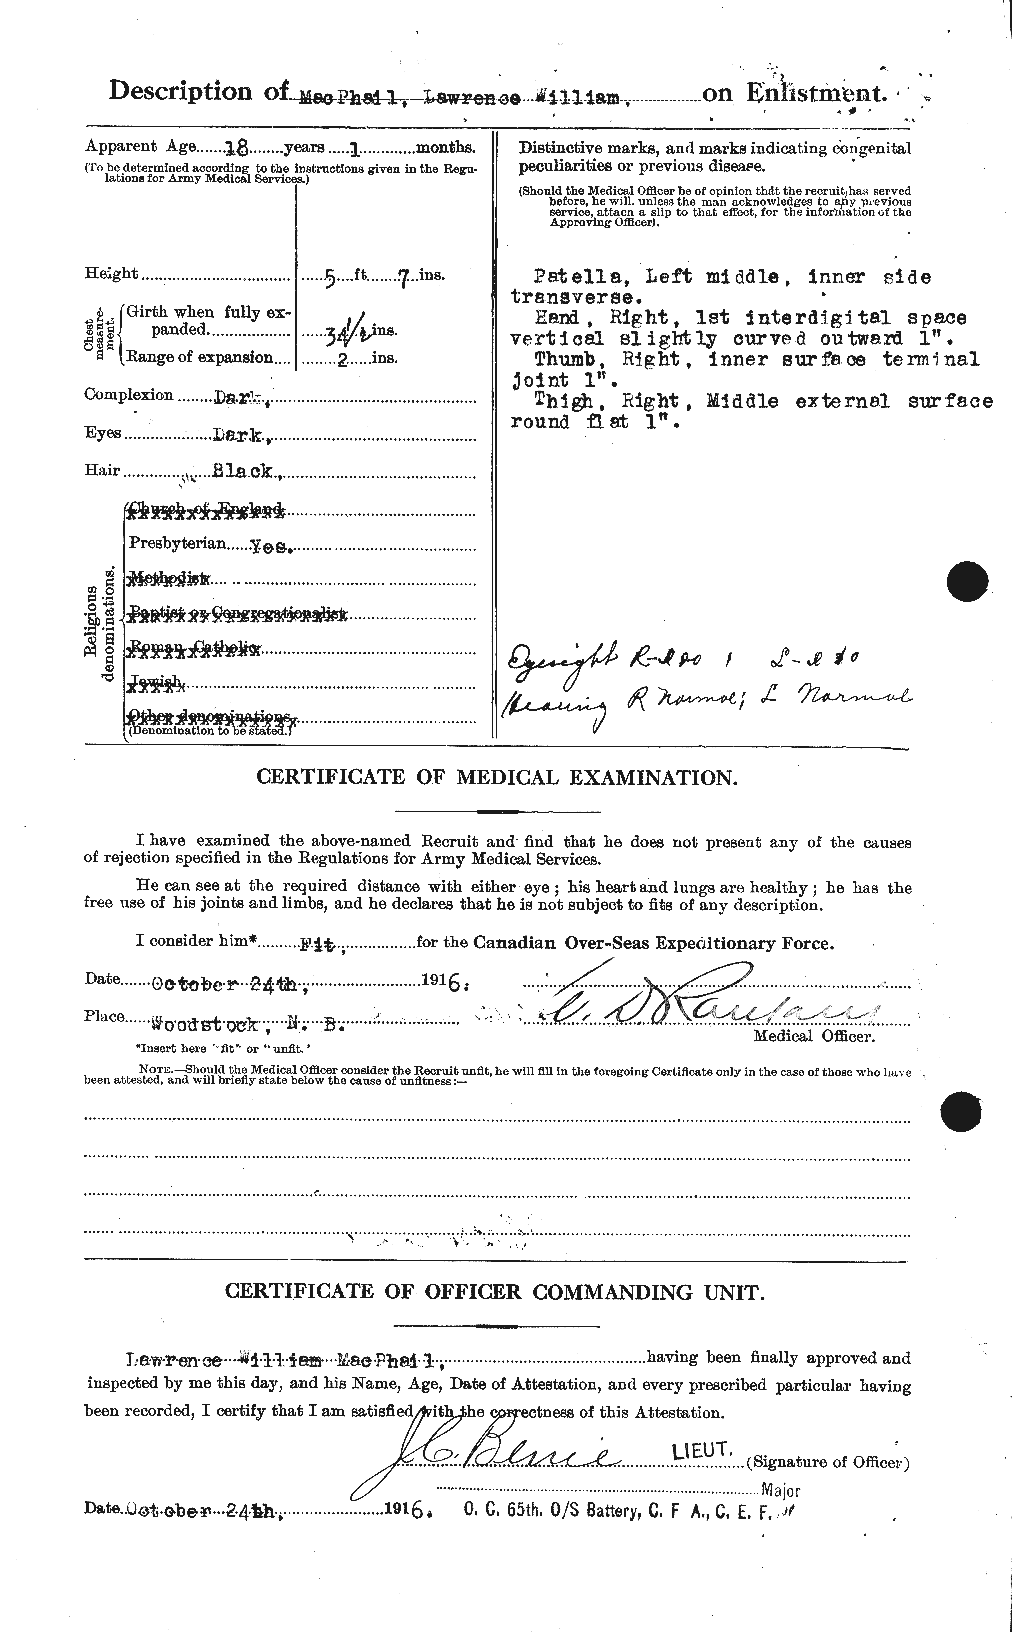 Personnel Records of the First World War - CEF 540887b